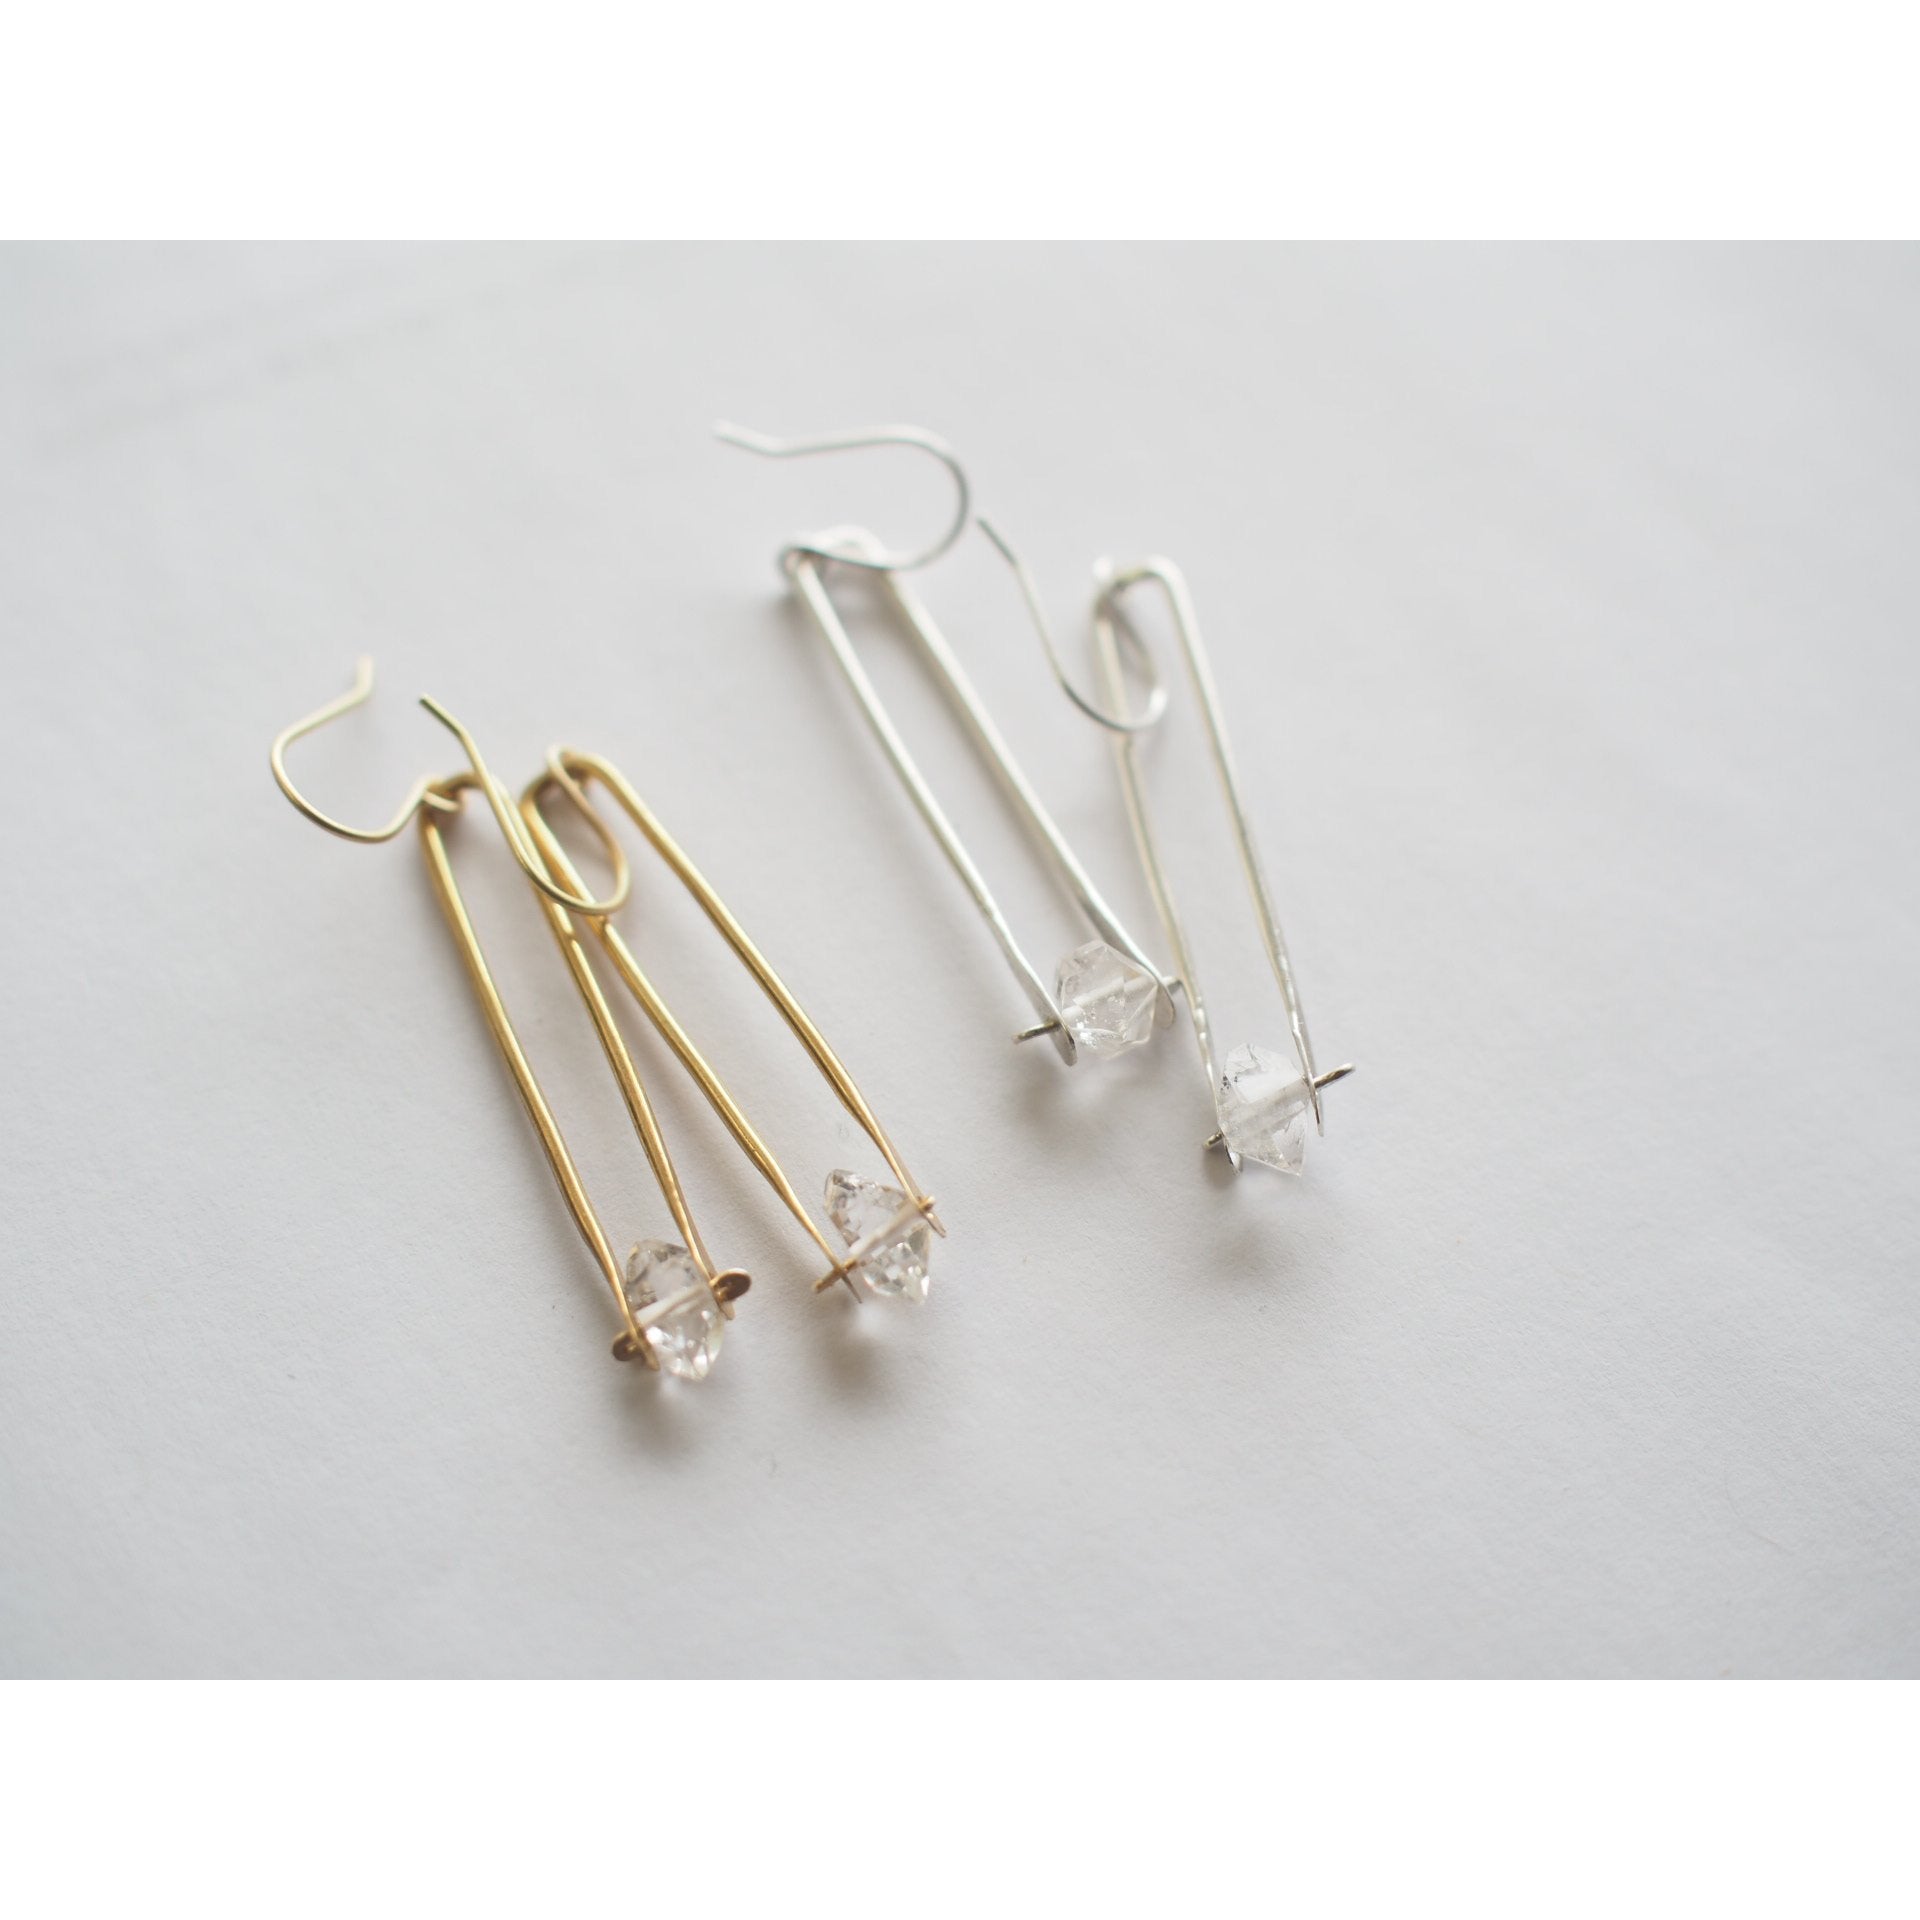 Minimalist gold frame crystal earrings by Iron Oxide